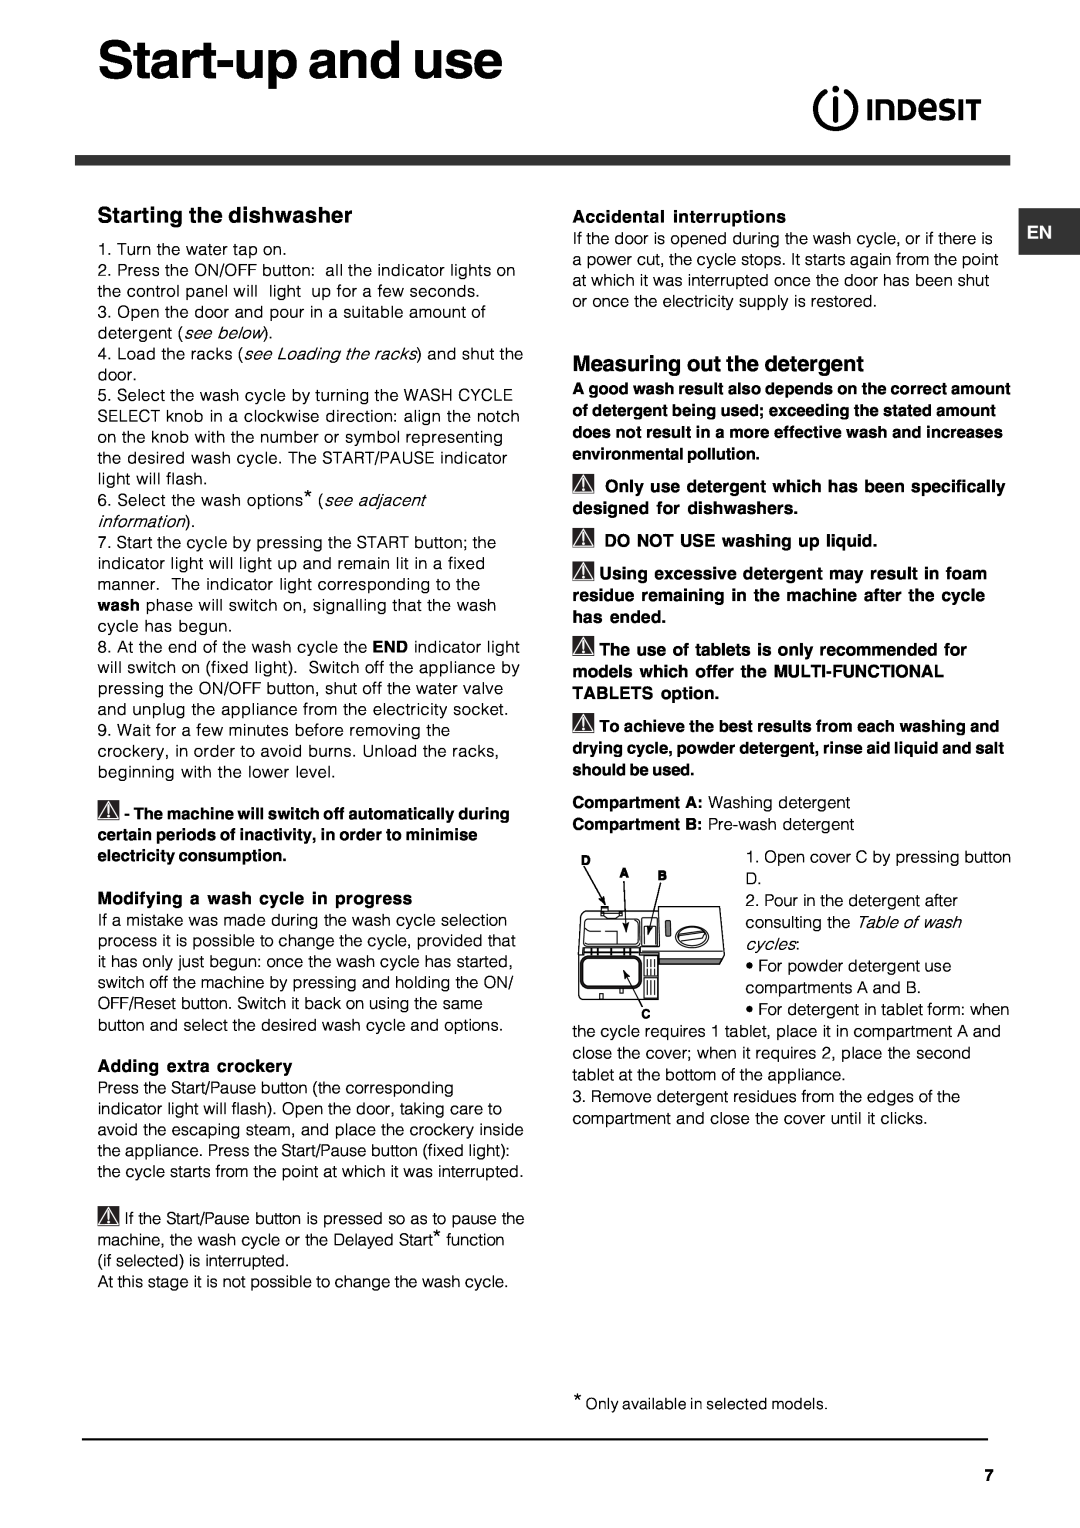 Indesit IDS 105 operating instructions Start-upand use, Starting the dishwasher, Measuring out the detergent 